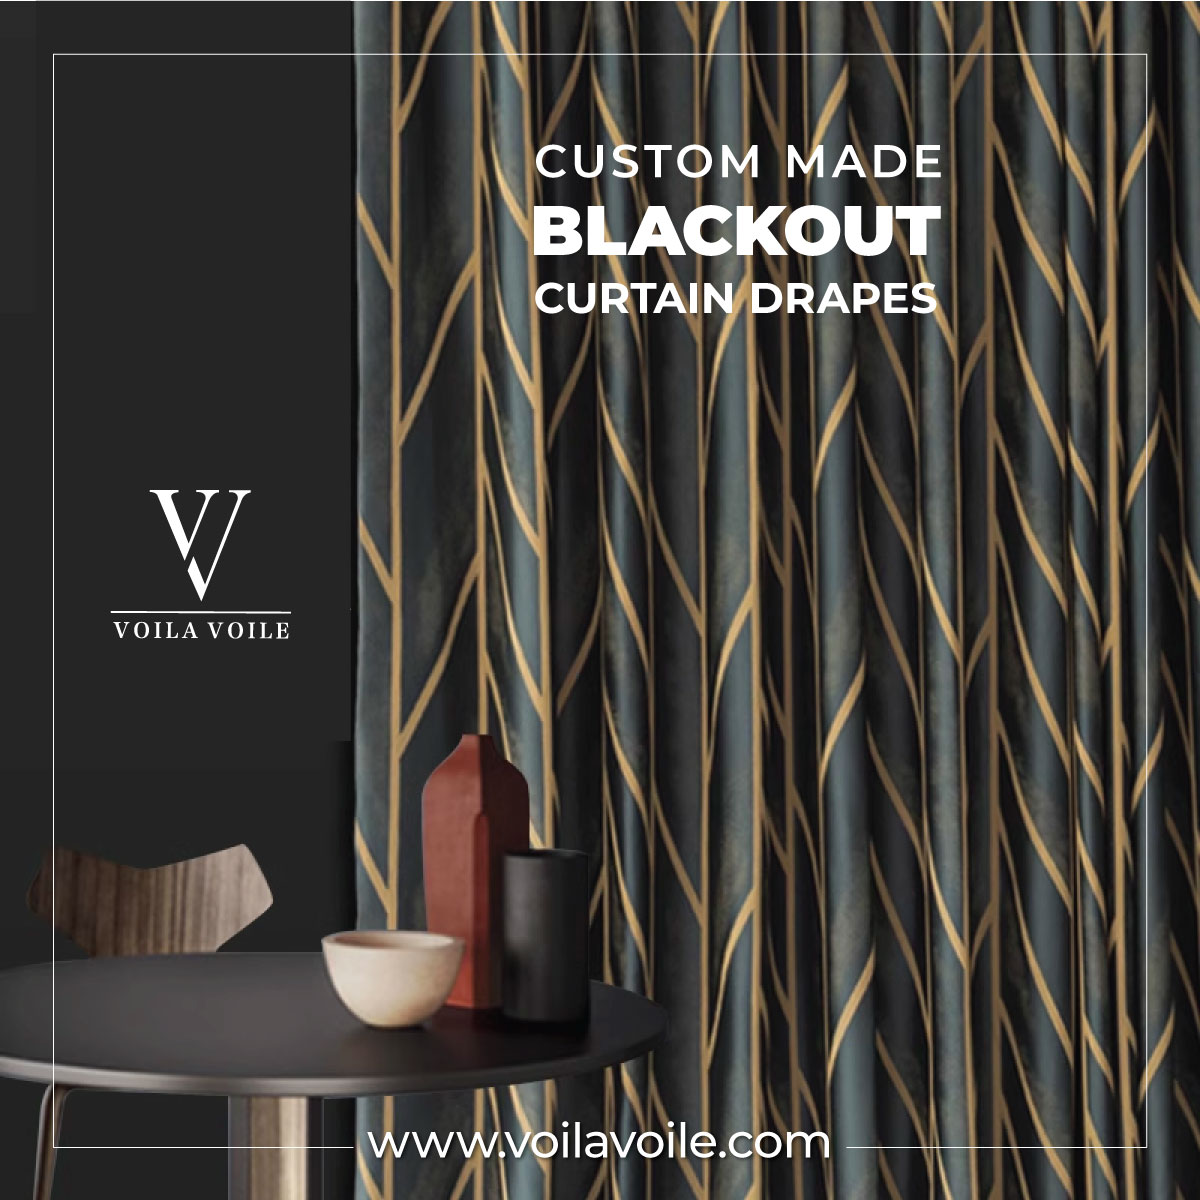 The World of Dreams: Transform Your Space with Custom Blackout Drapes